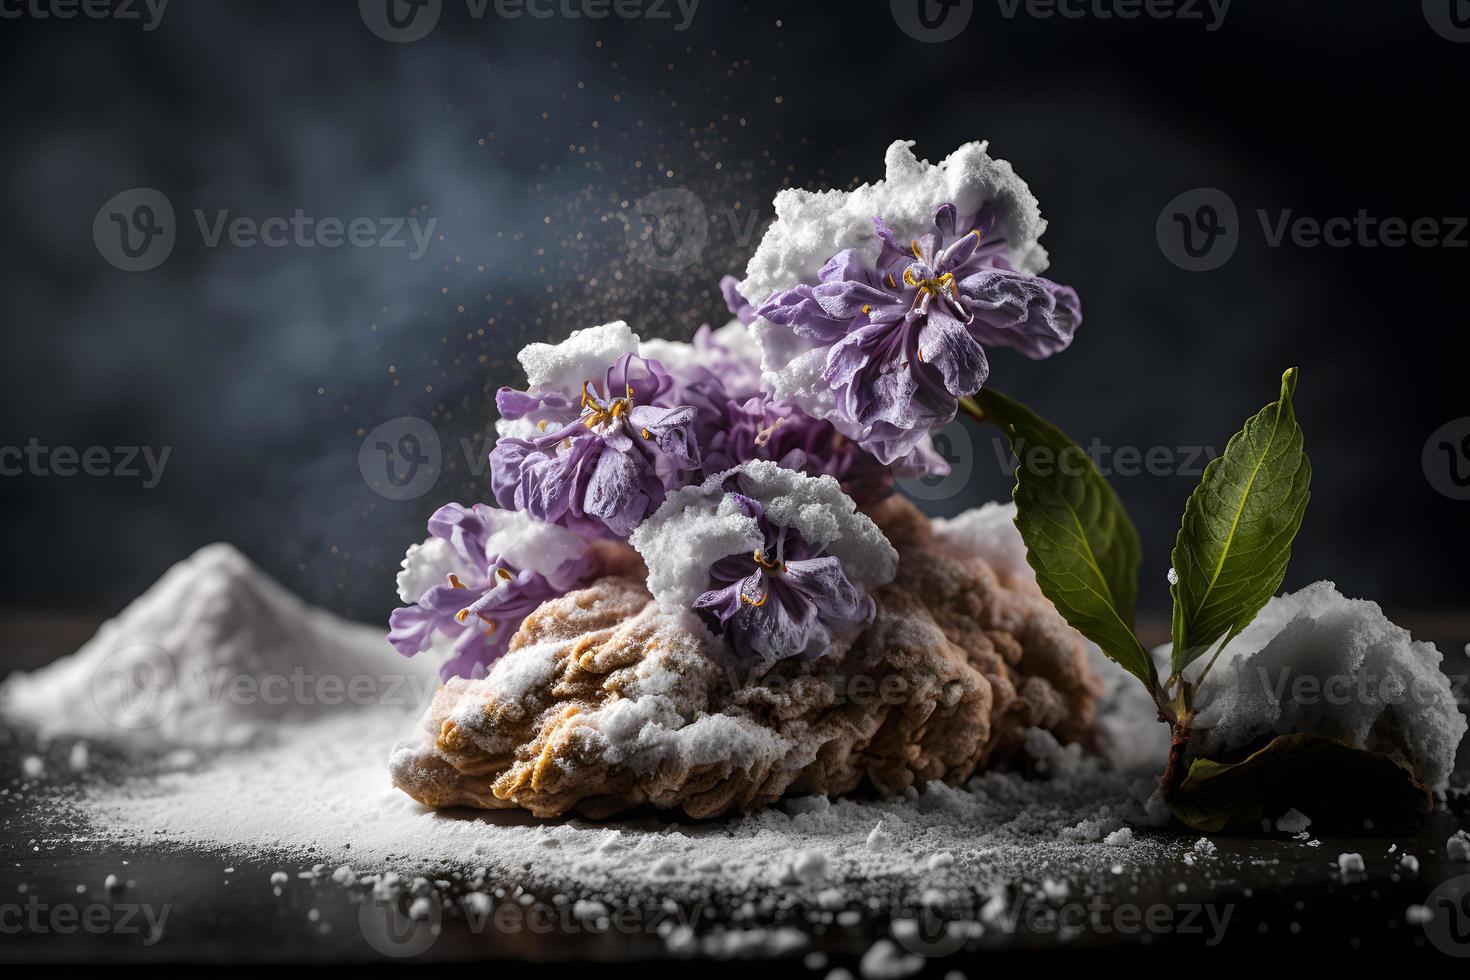 Homemade and tasty fried lilac flower with powdered sugar food photography photo